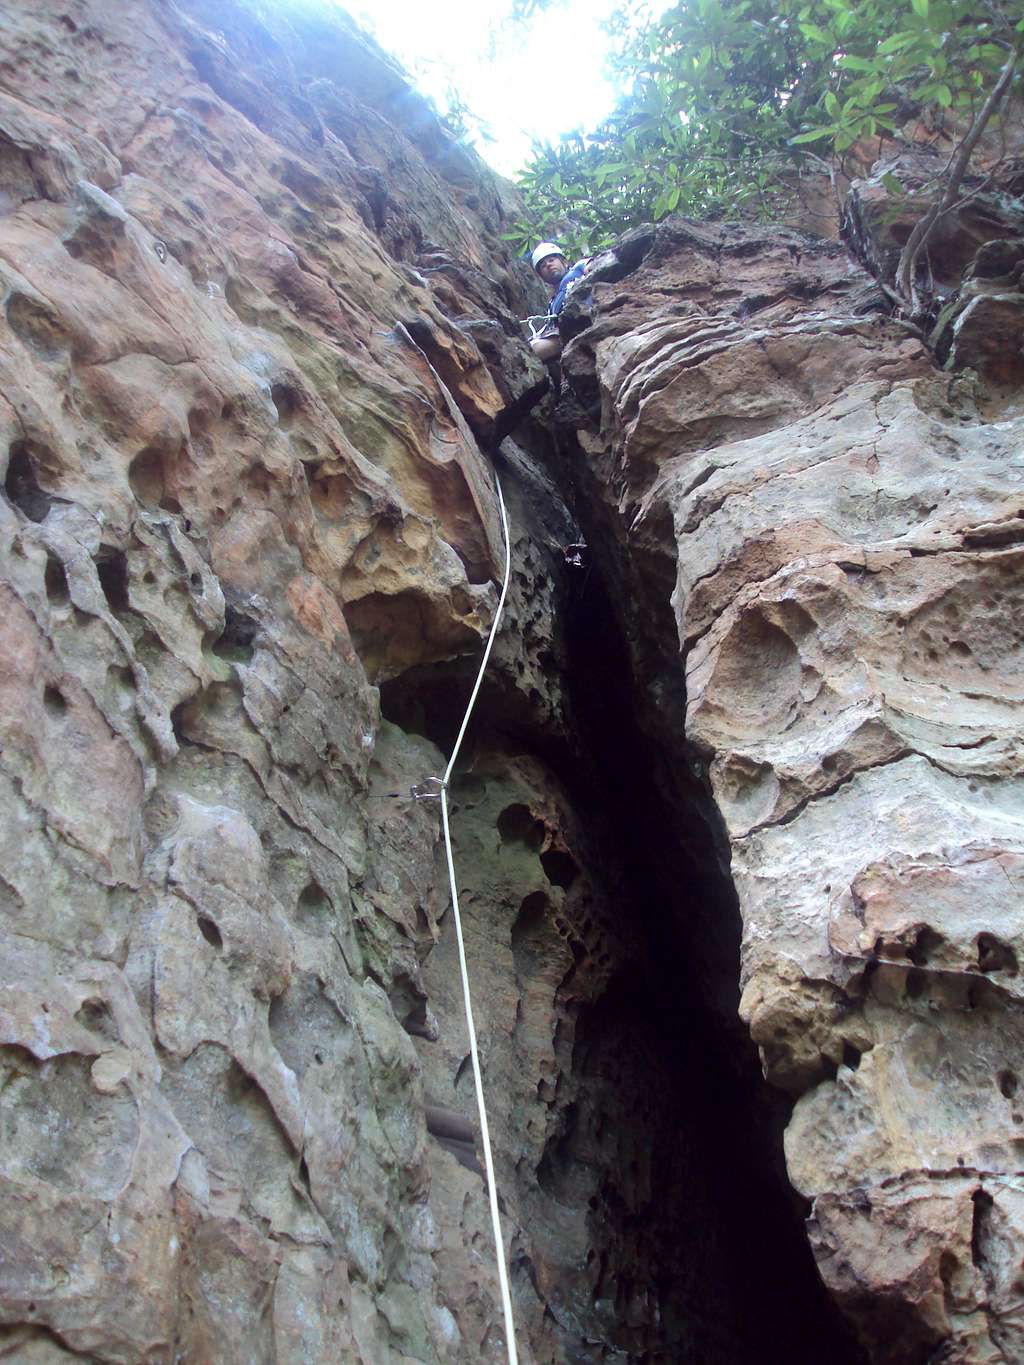 At the top of the first pitch (unknown chimney of military wall) Red River Gorge, June 2010